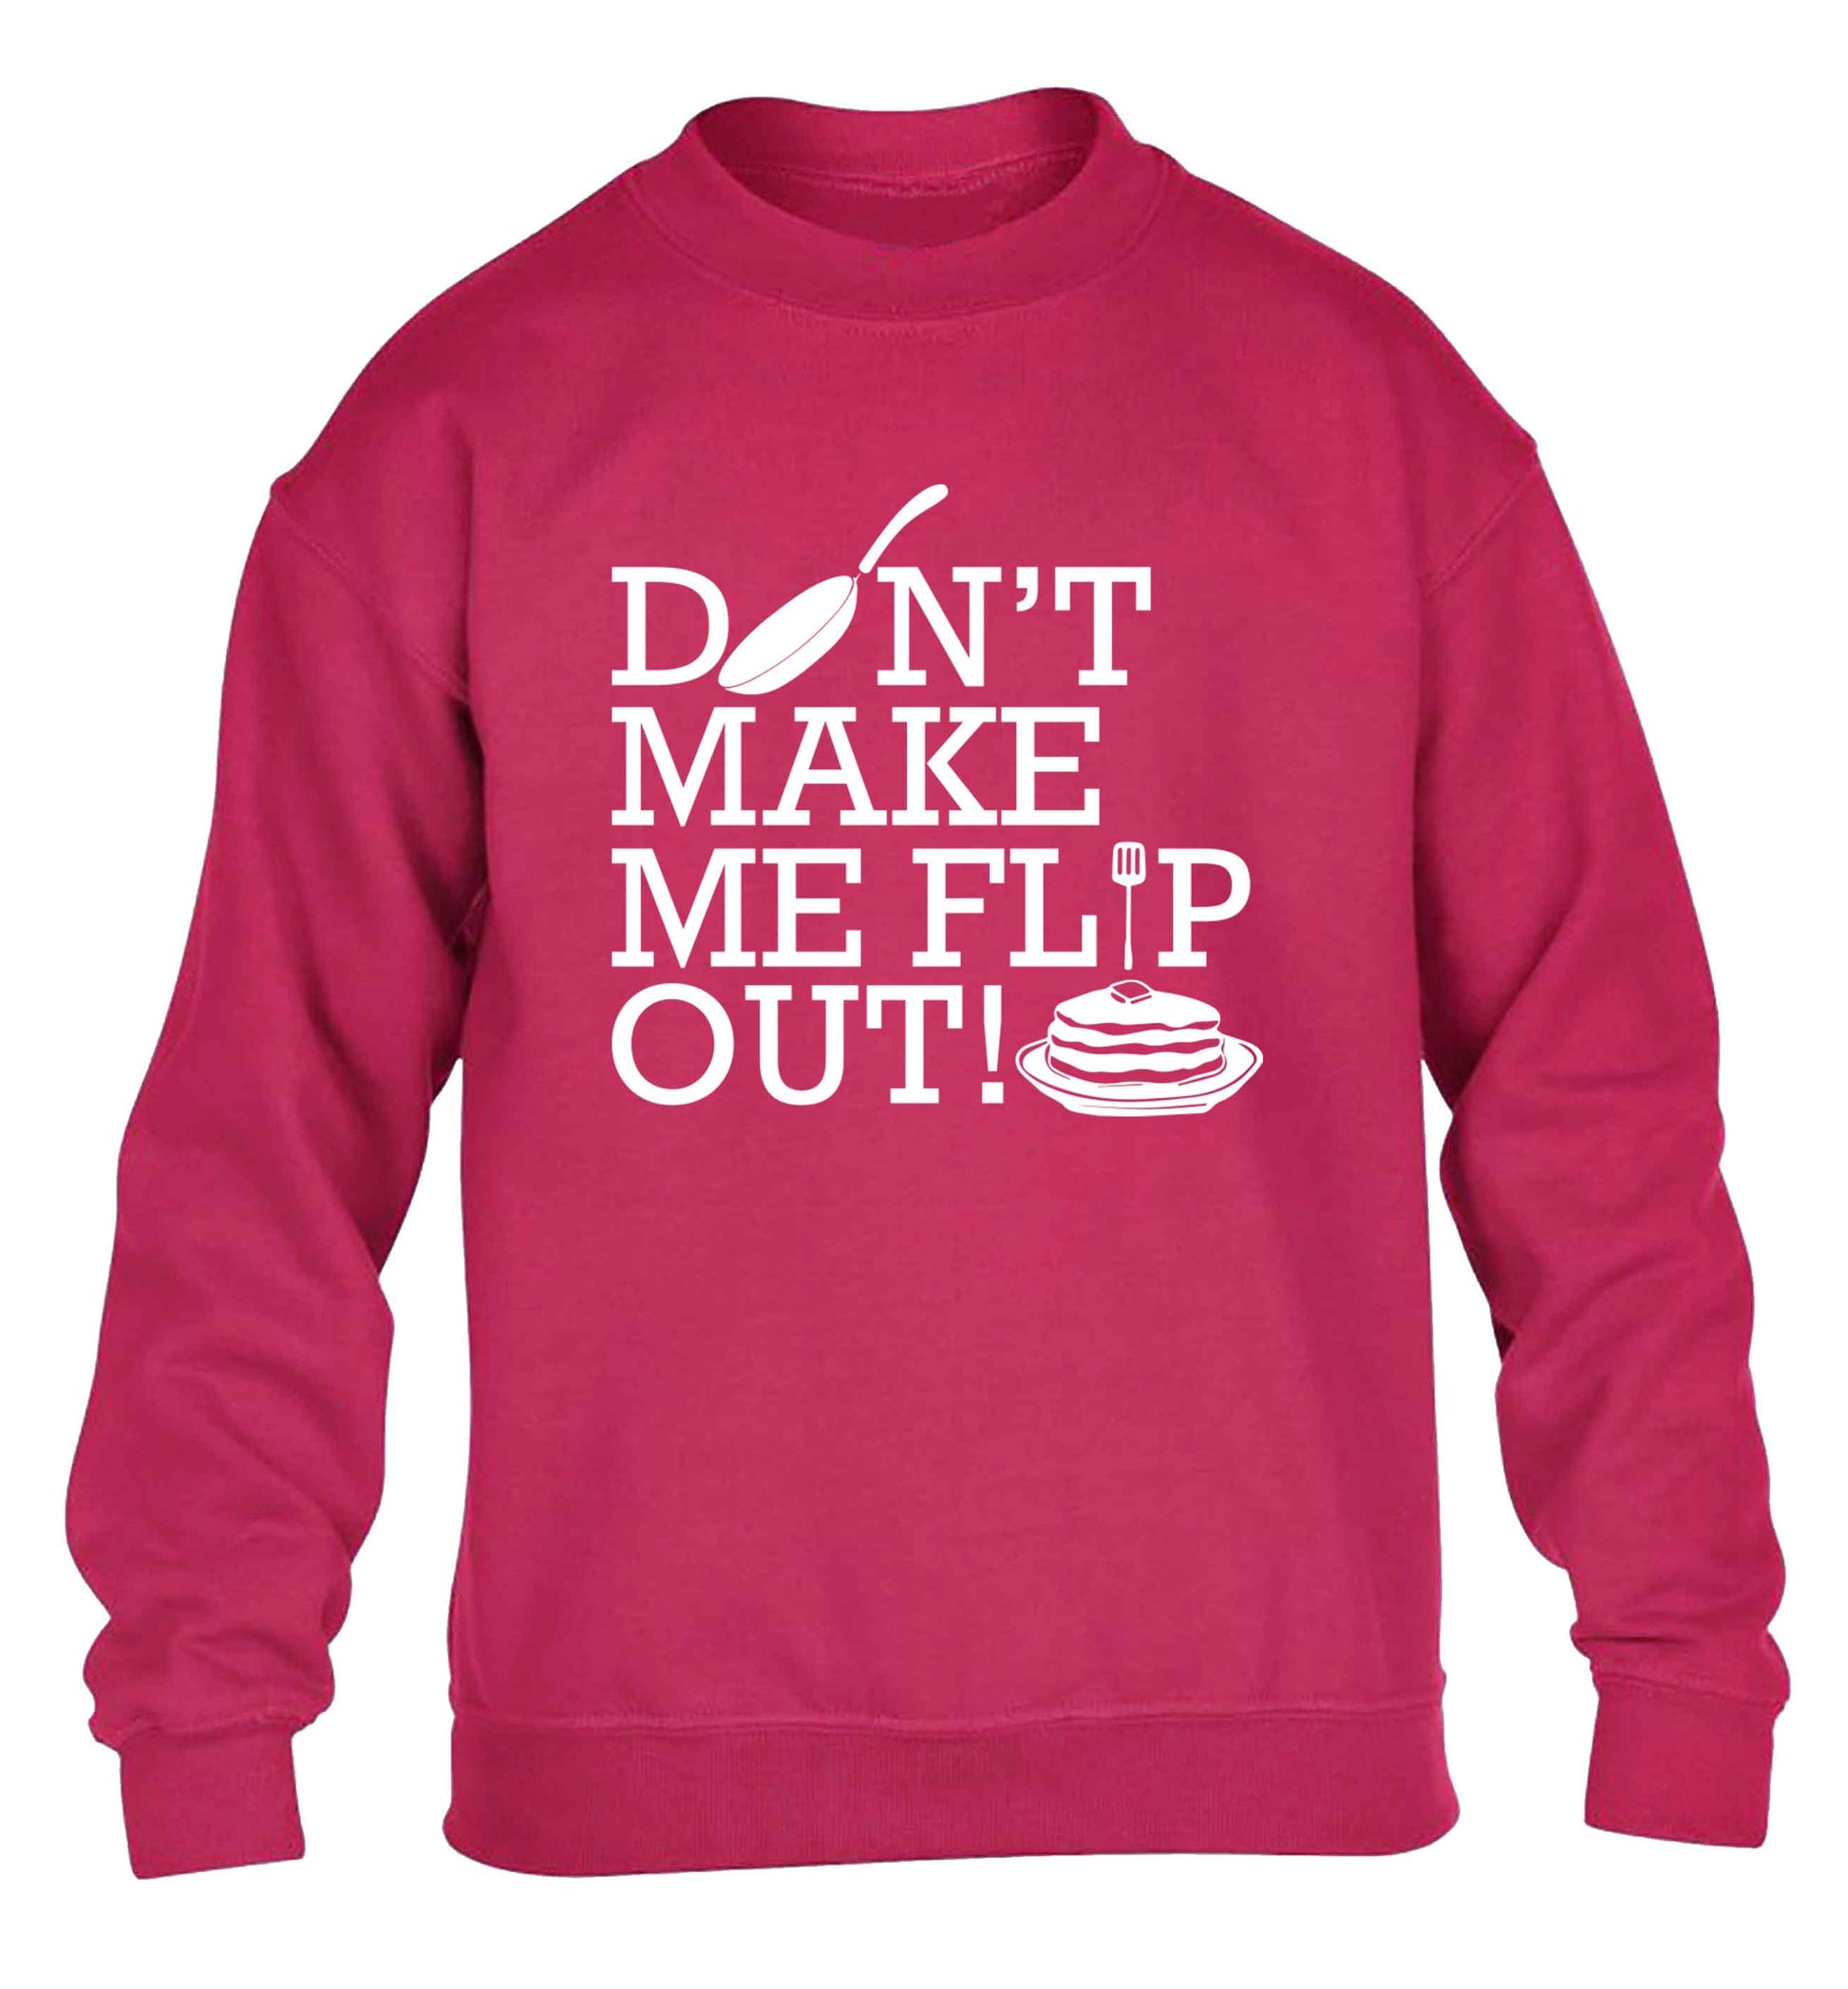 Don't make me flip out children's pink sweater 12-13 Years